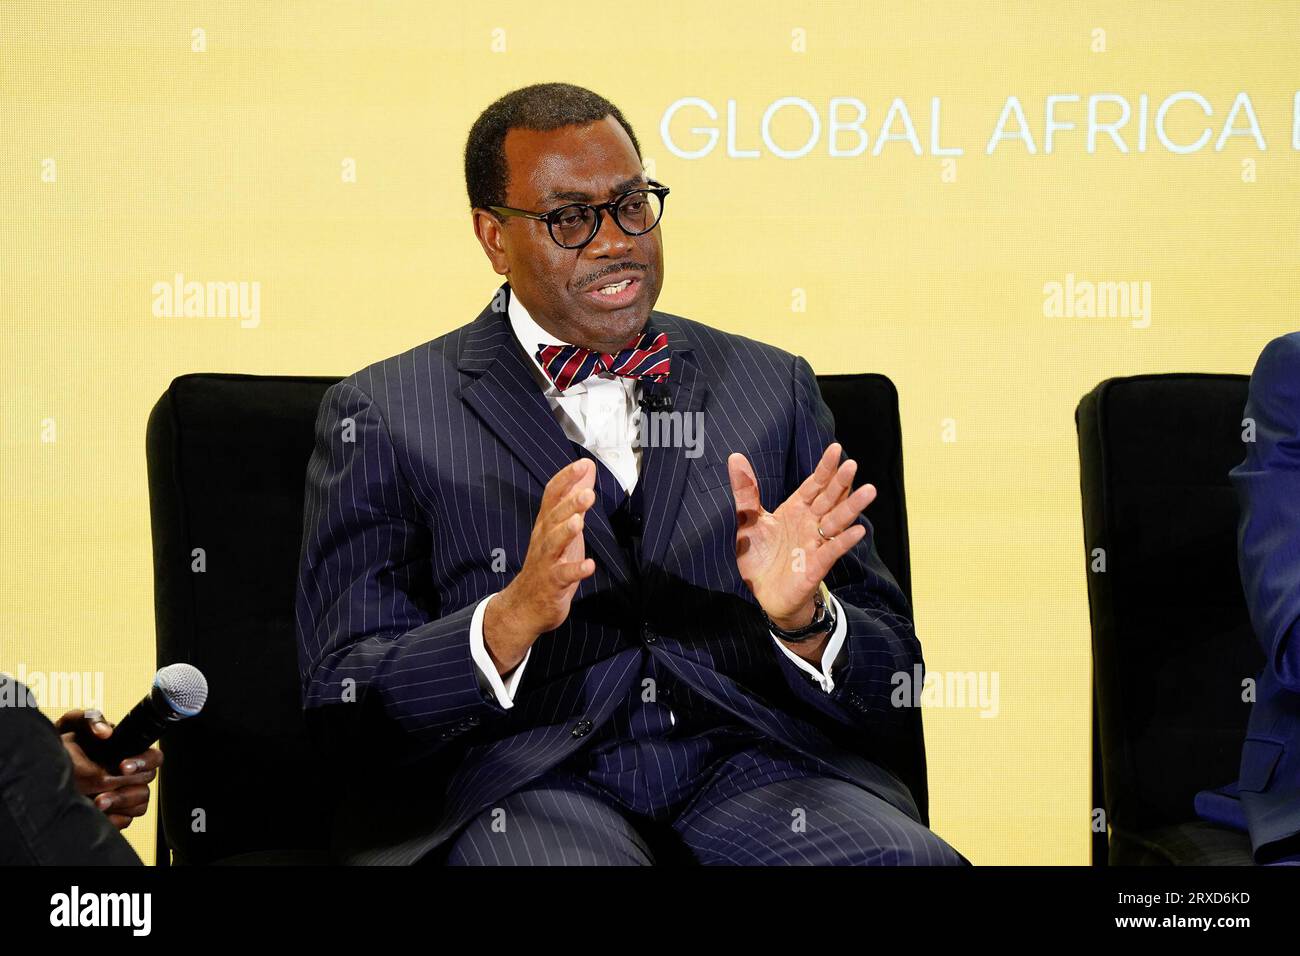 New York, New York, USA  21-22  Sept 2023 Dr. Akinwuni Adesina during the 2023 UNSTOPPABLE AFRICA Conference Presented By Global African Business Initiative, held at the Westin Grand Central in New York City, September 21-22 2023. Photo by Jennifer Graylock-Alamy Stock Photo